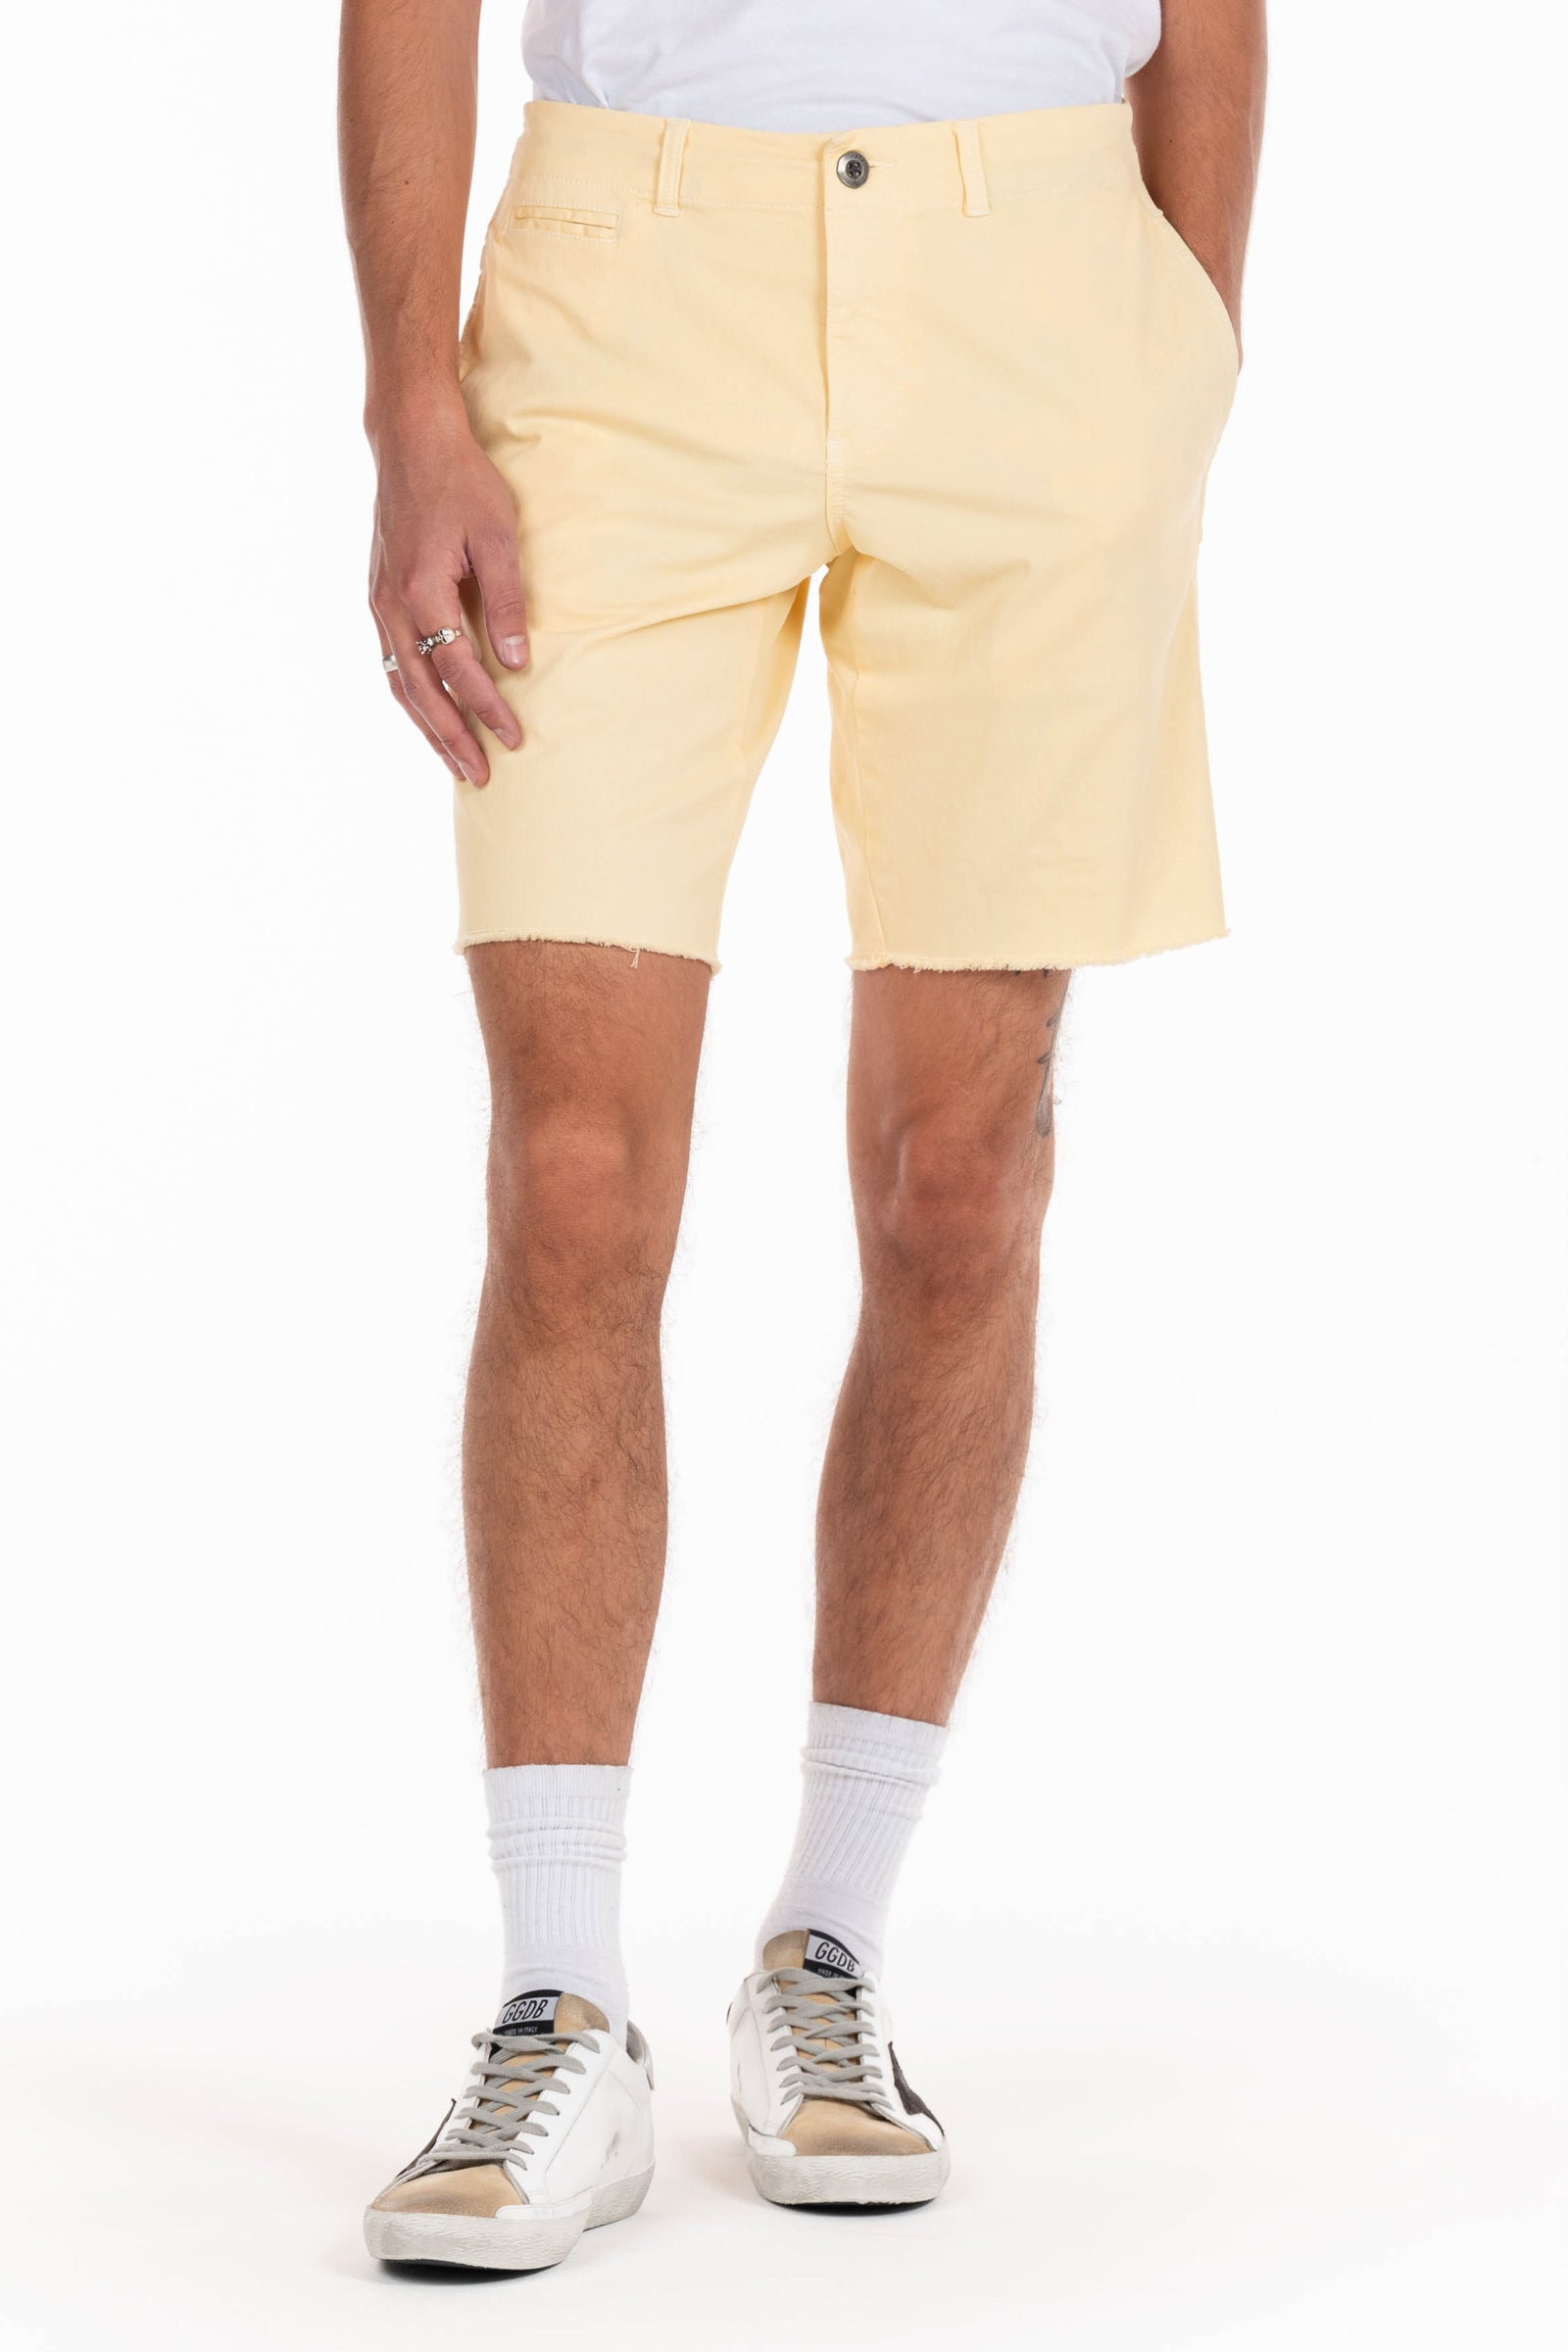 Original Paperbacks Rockland Chino Short in Custard on Model Cropped Styled View